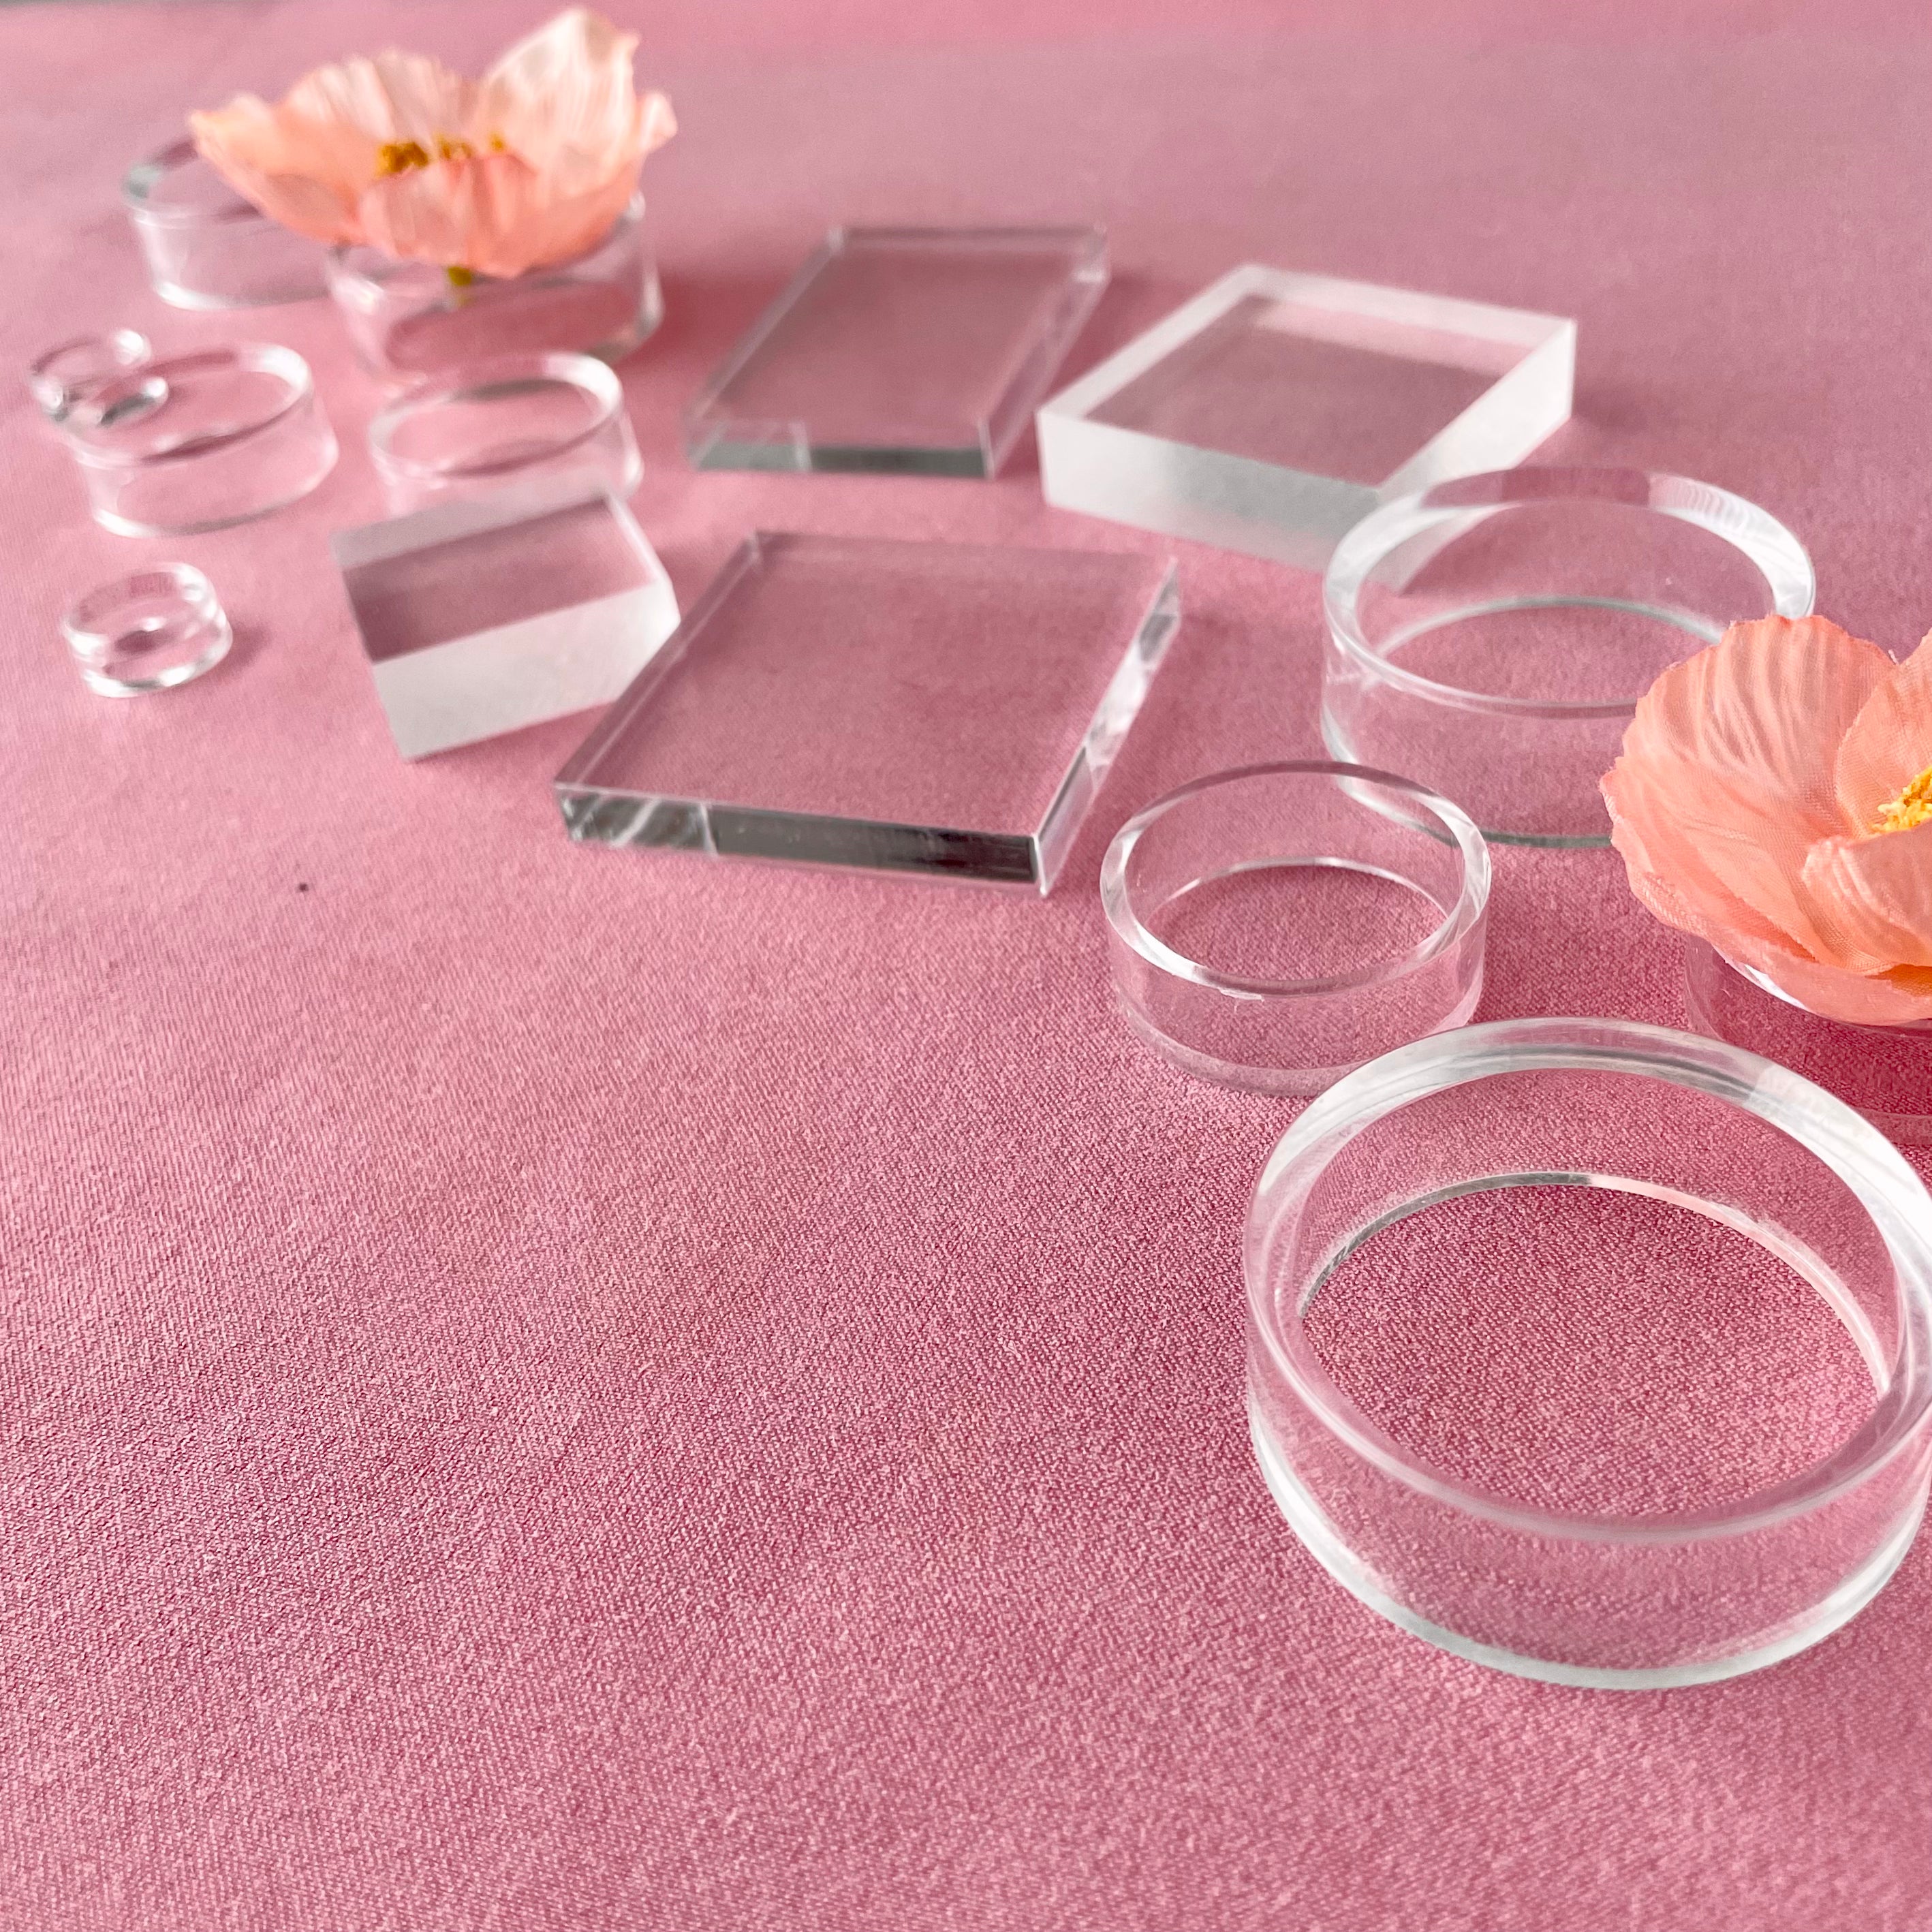 Side angle photo of Clear Acrylic Styling Block Set & Floral Risers for Flat Lays on a Dusty Pink Styling Mat from Champagne & GRIT